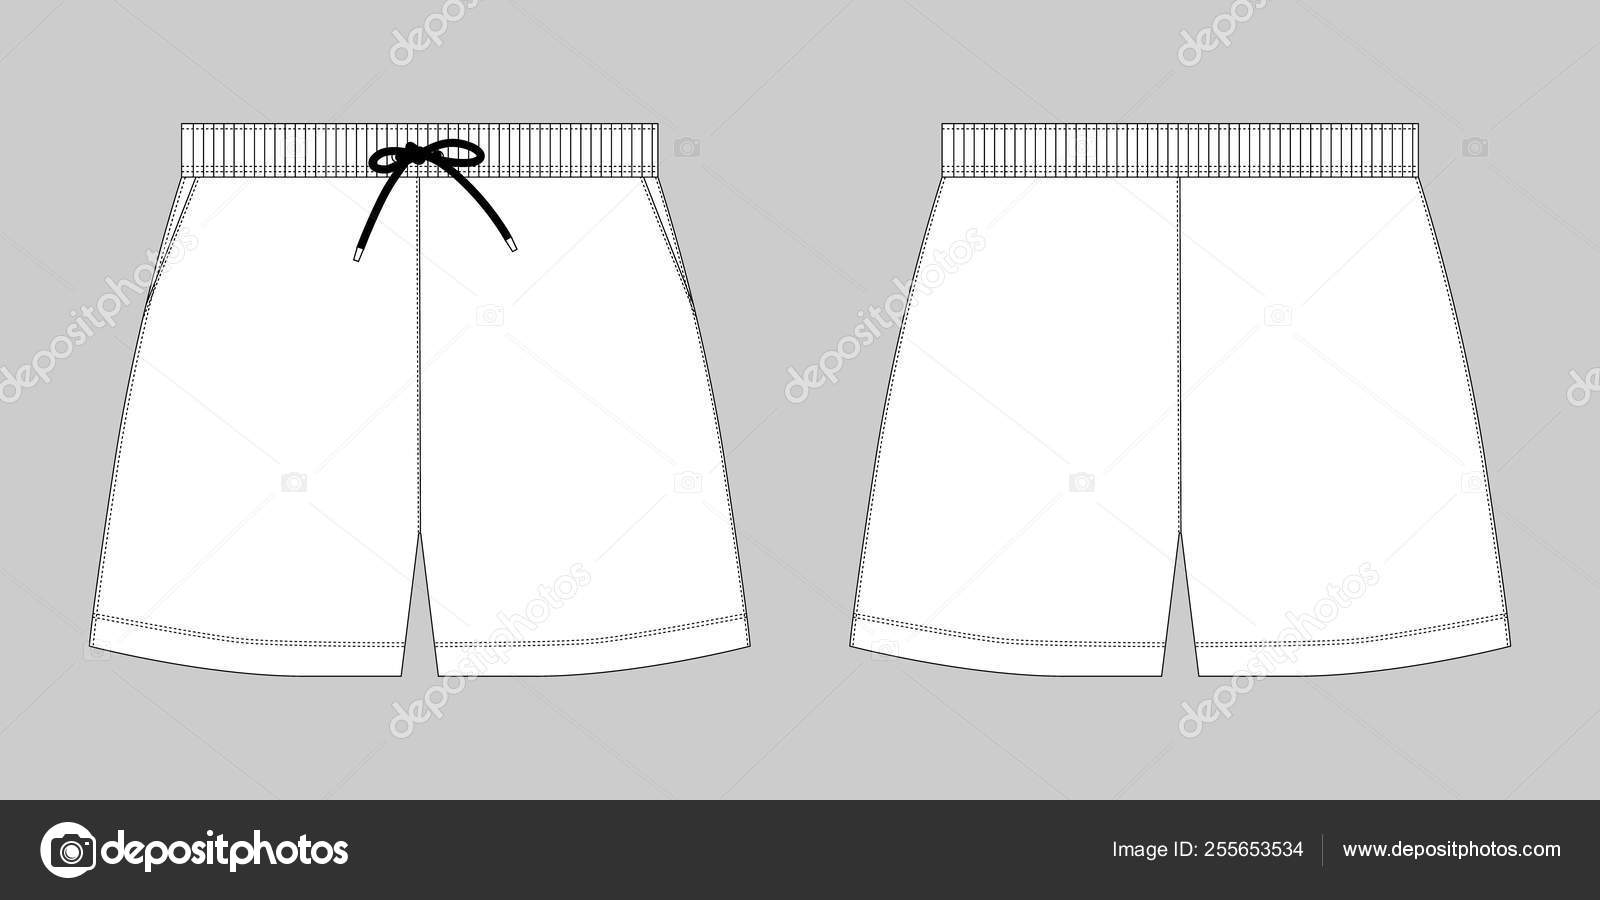 Image Details IST_21848_21128 - Set of blank shorts pants technical sketch  design template. Diffirent colors. Casual shorts with pockets collection.  CAD mockup. Front and back. Technical fashion vector illustration. Set of  blank